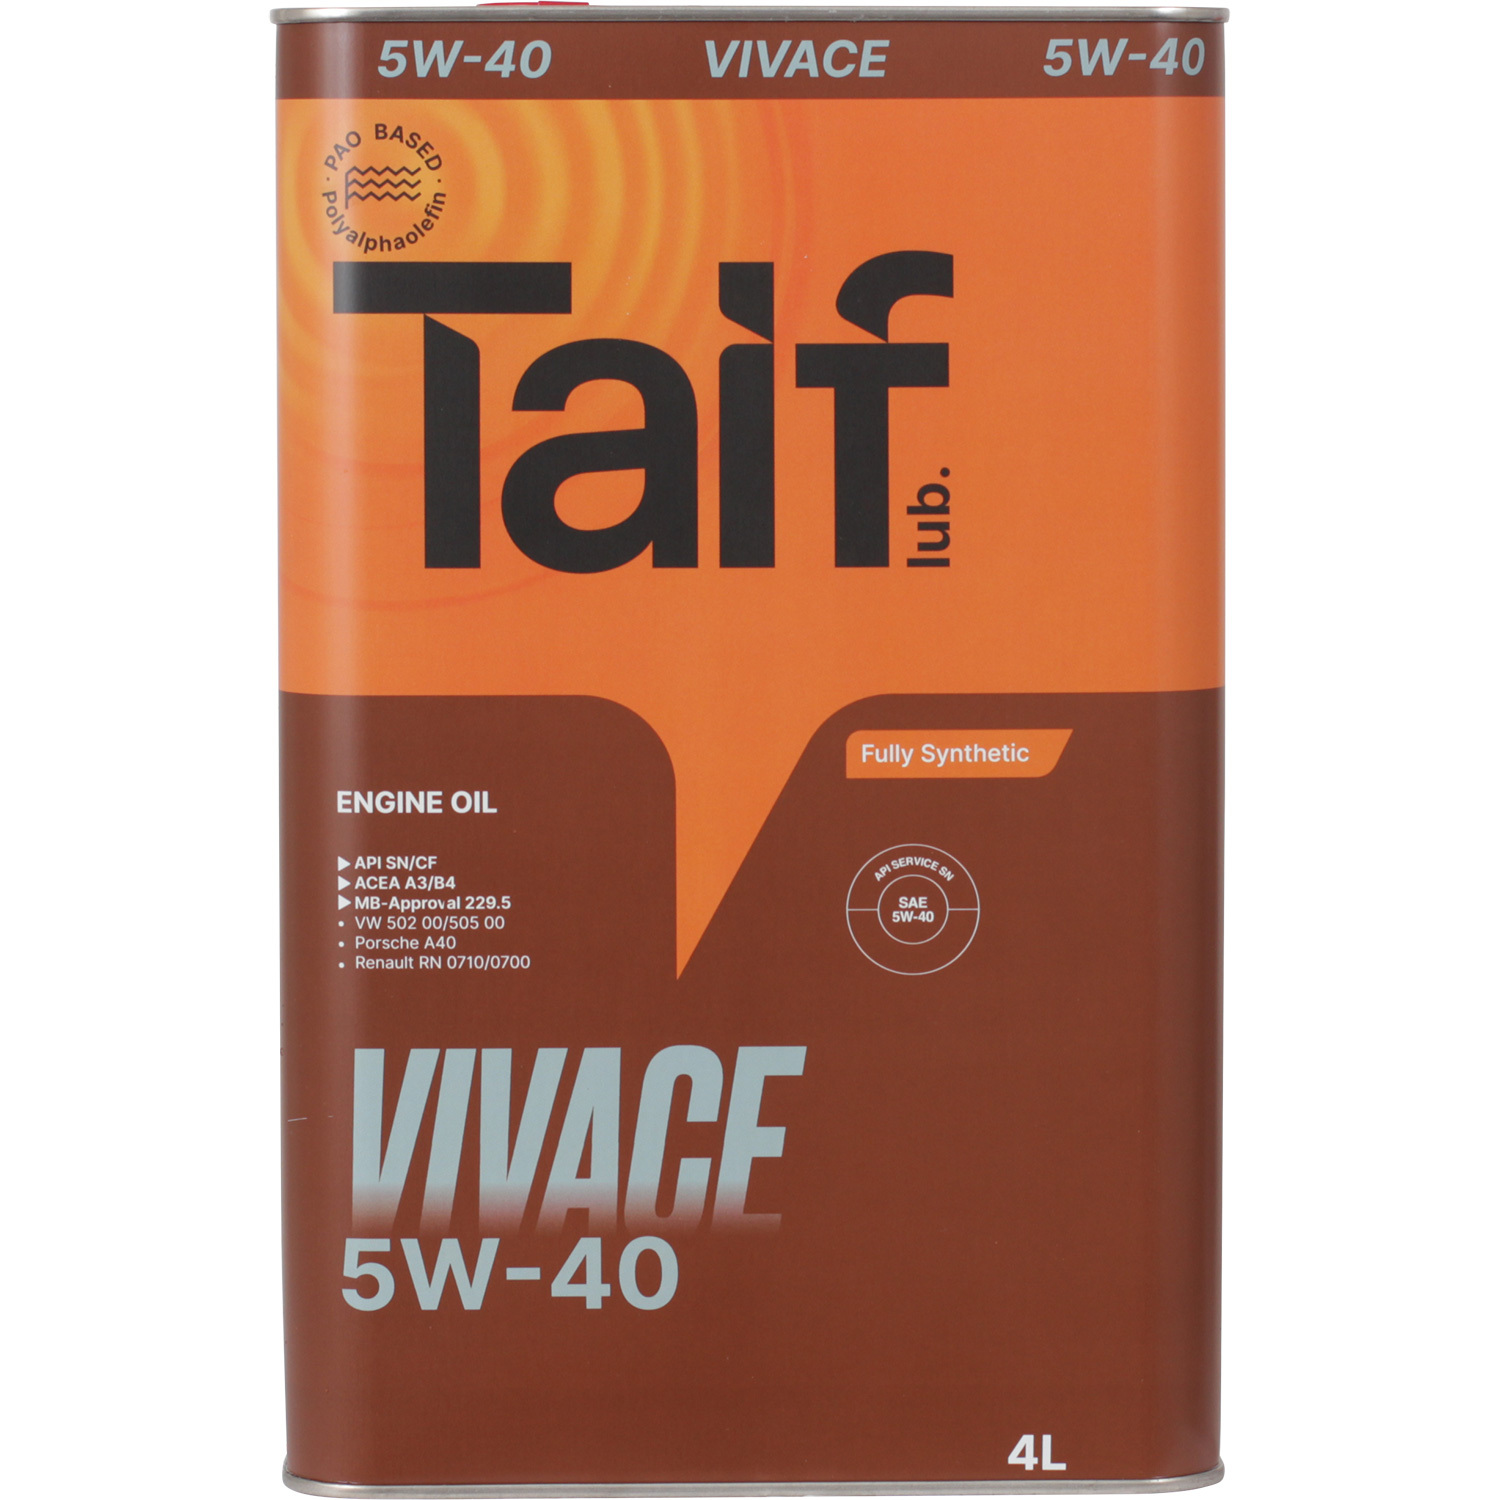 Taif Моторное масло Taif VIVACE 5W-40, 4 л моторное масло синтетическое taif tact 5w 40 4 л